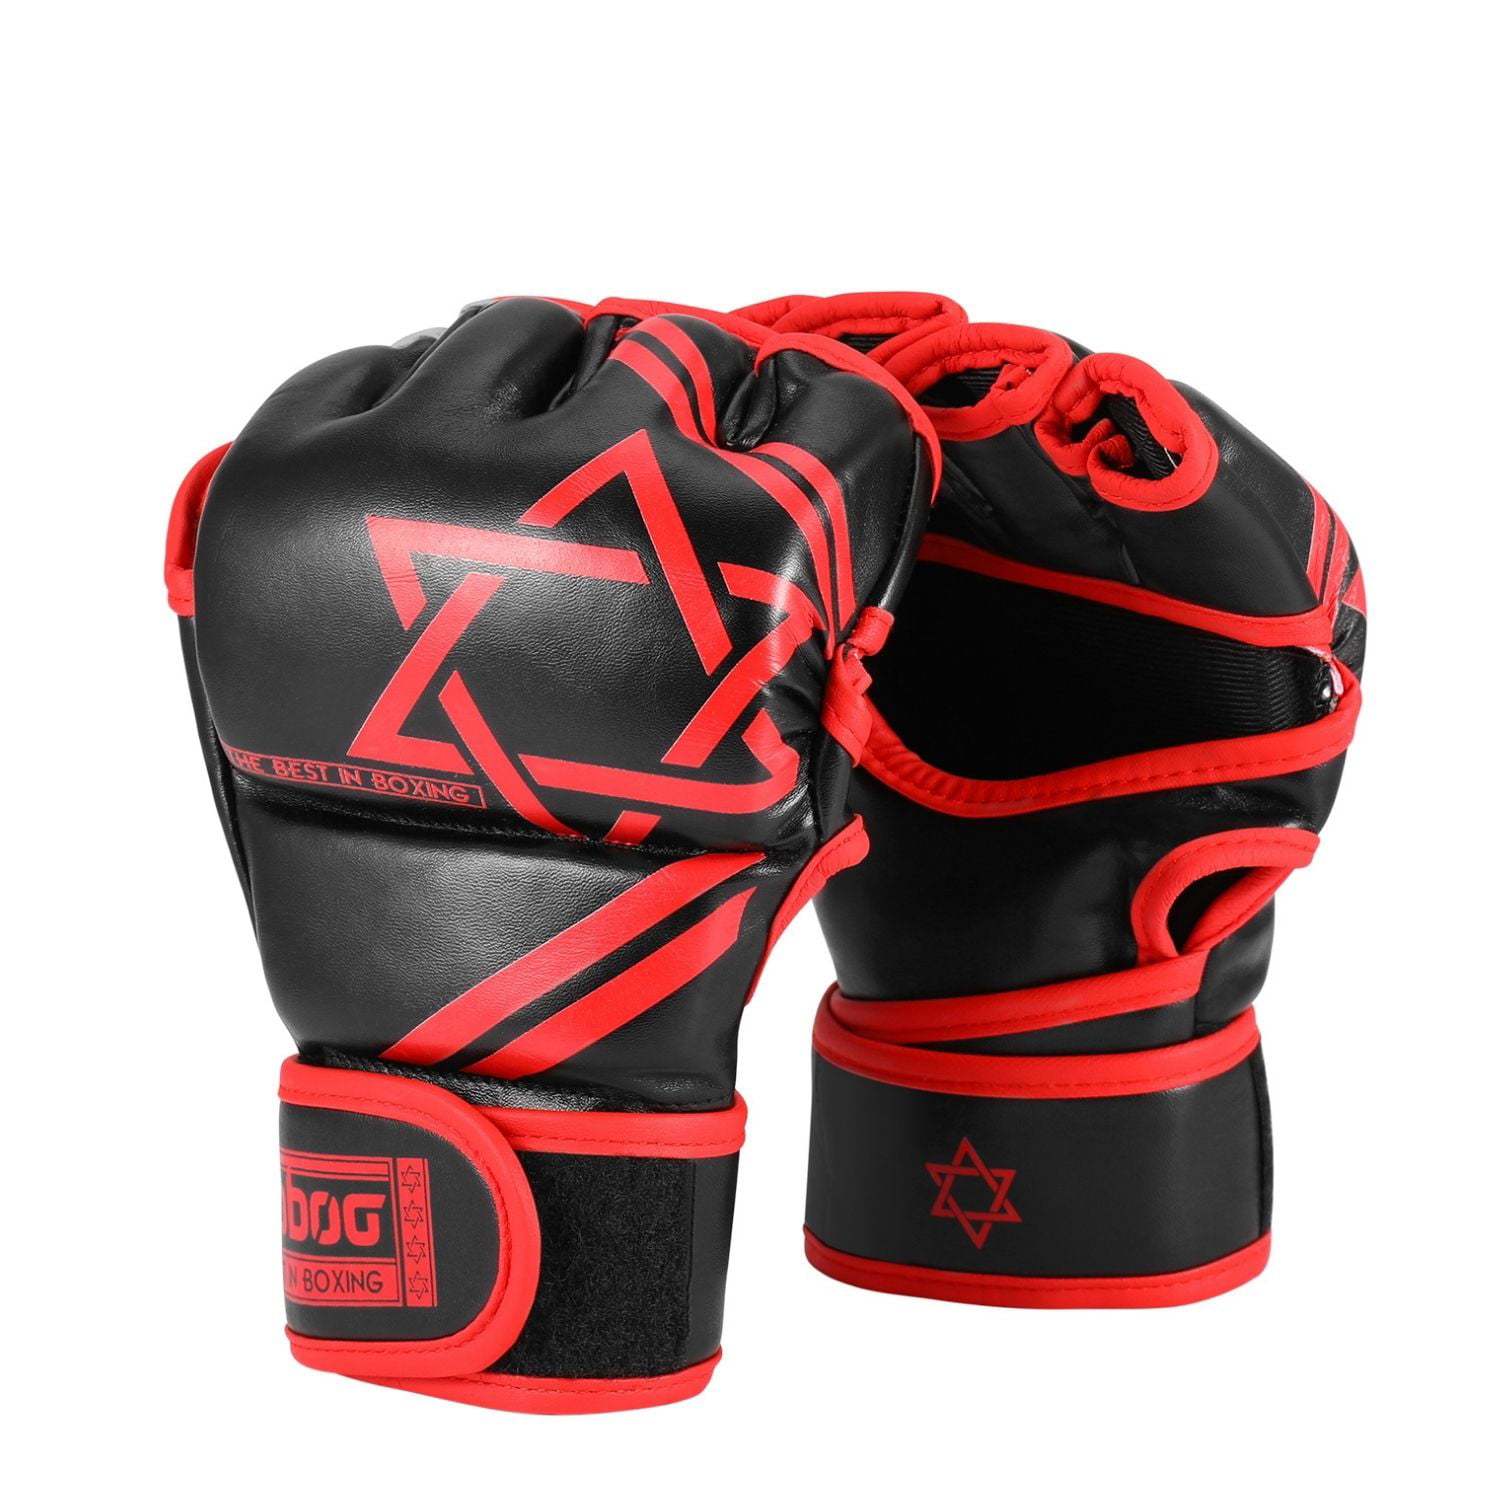 ADii™ Boxing Gloves Sparring Fight MMA Punch Training Muay Thai Kickboxing UFC 